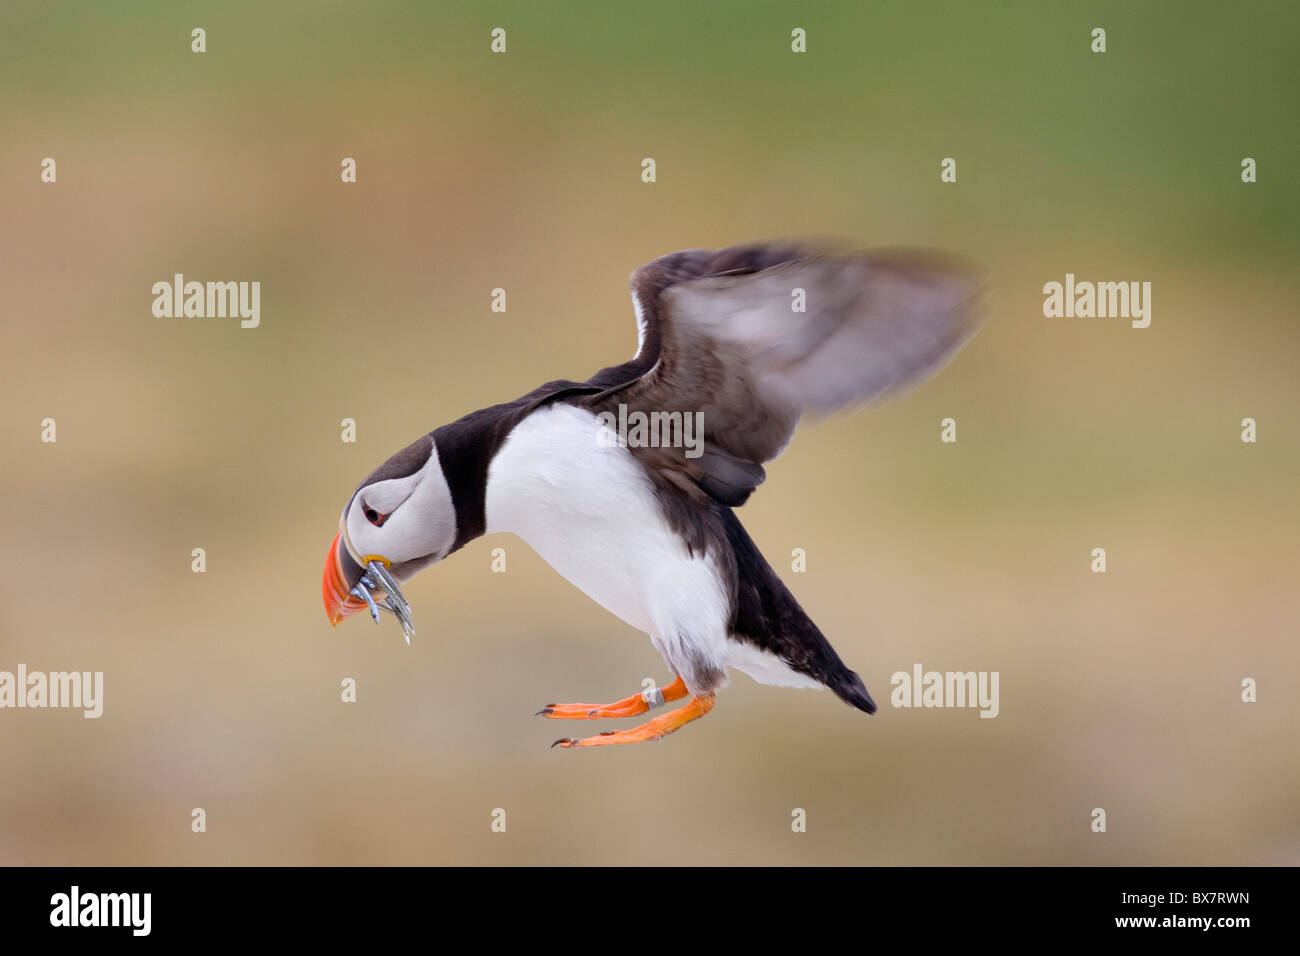 Puffin flying with fish in its beak Stock Photo